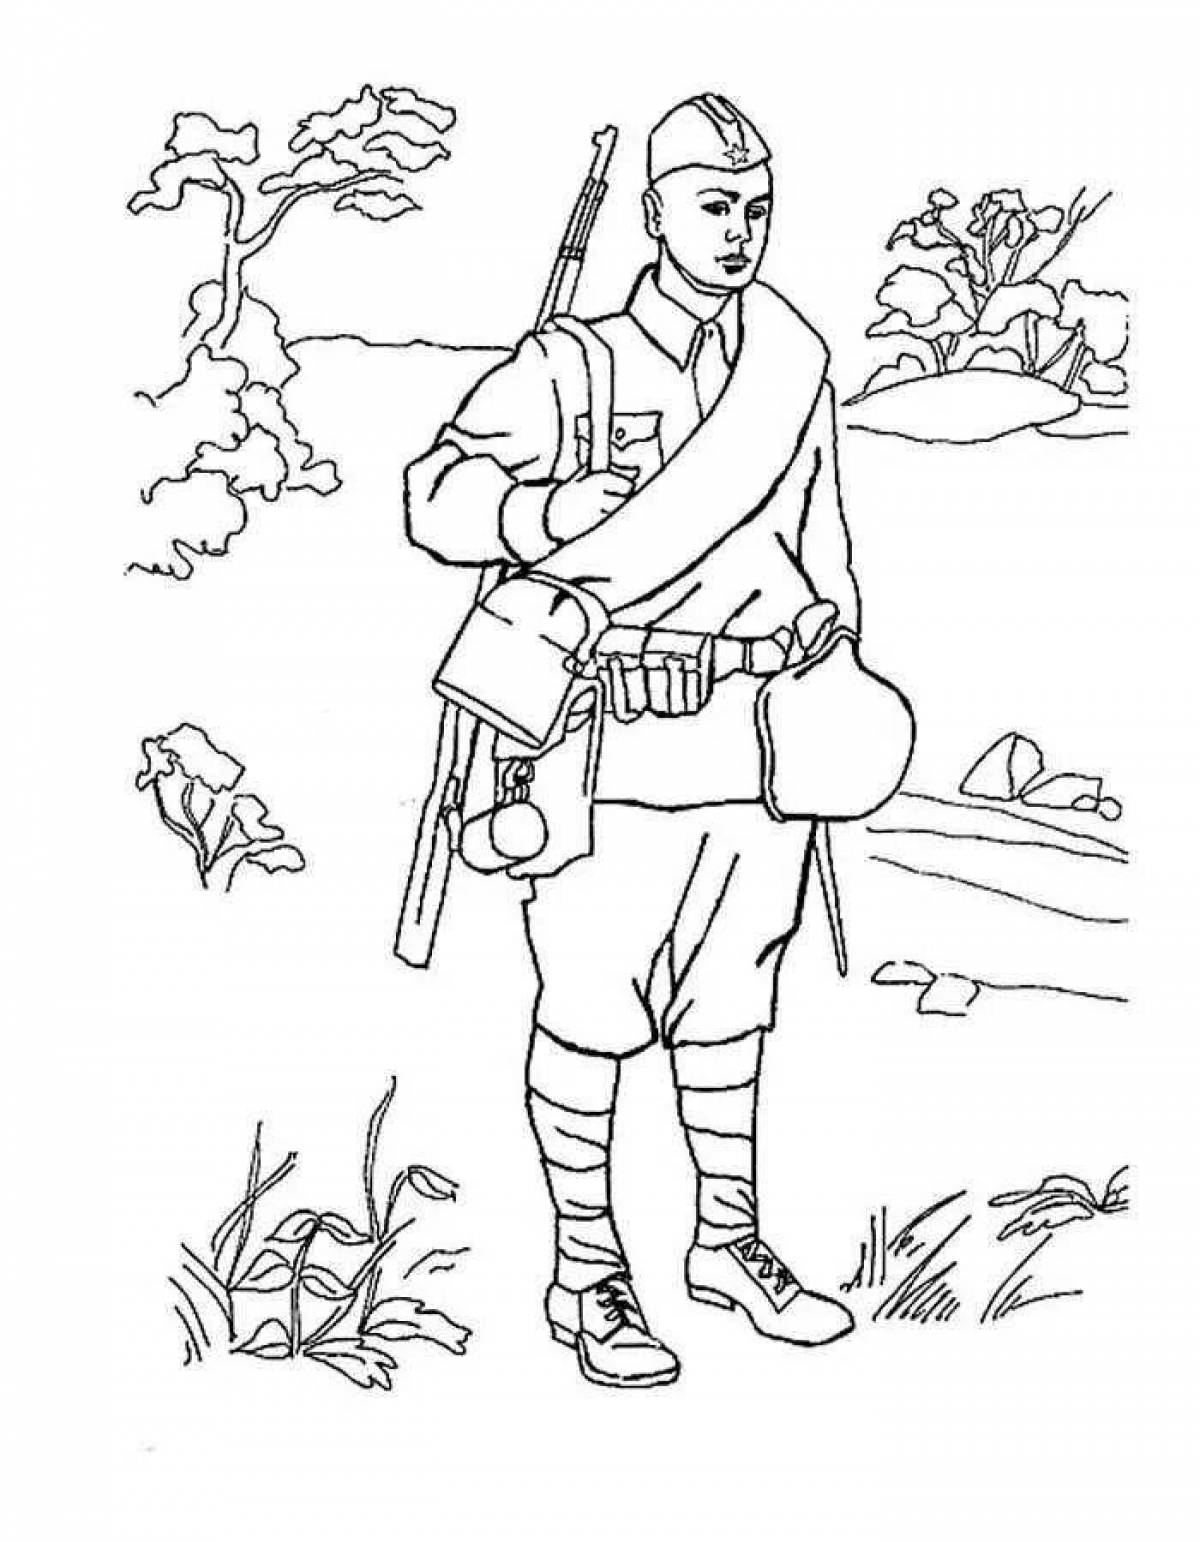 A strikingly majestic Russian soldier coloring book